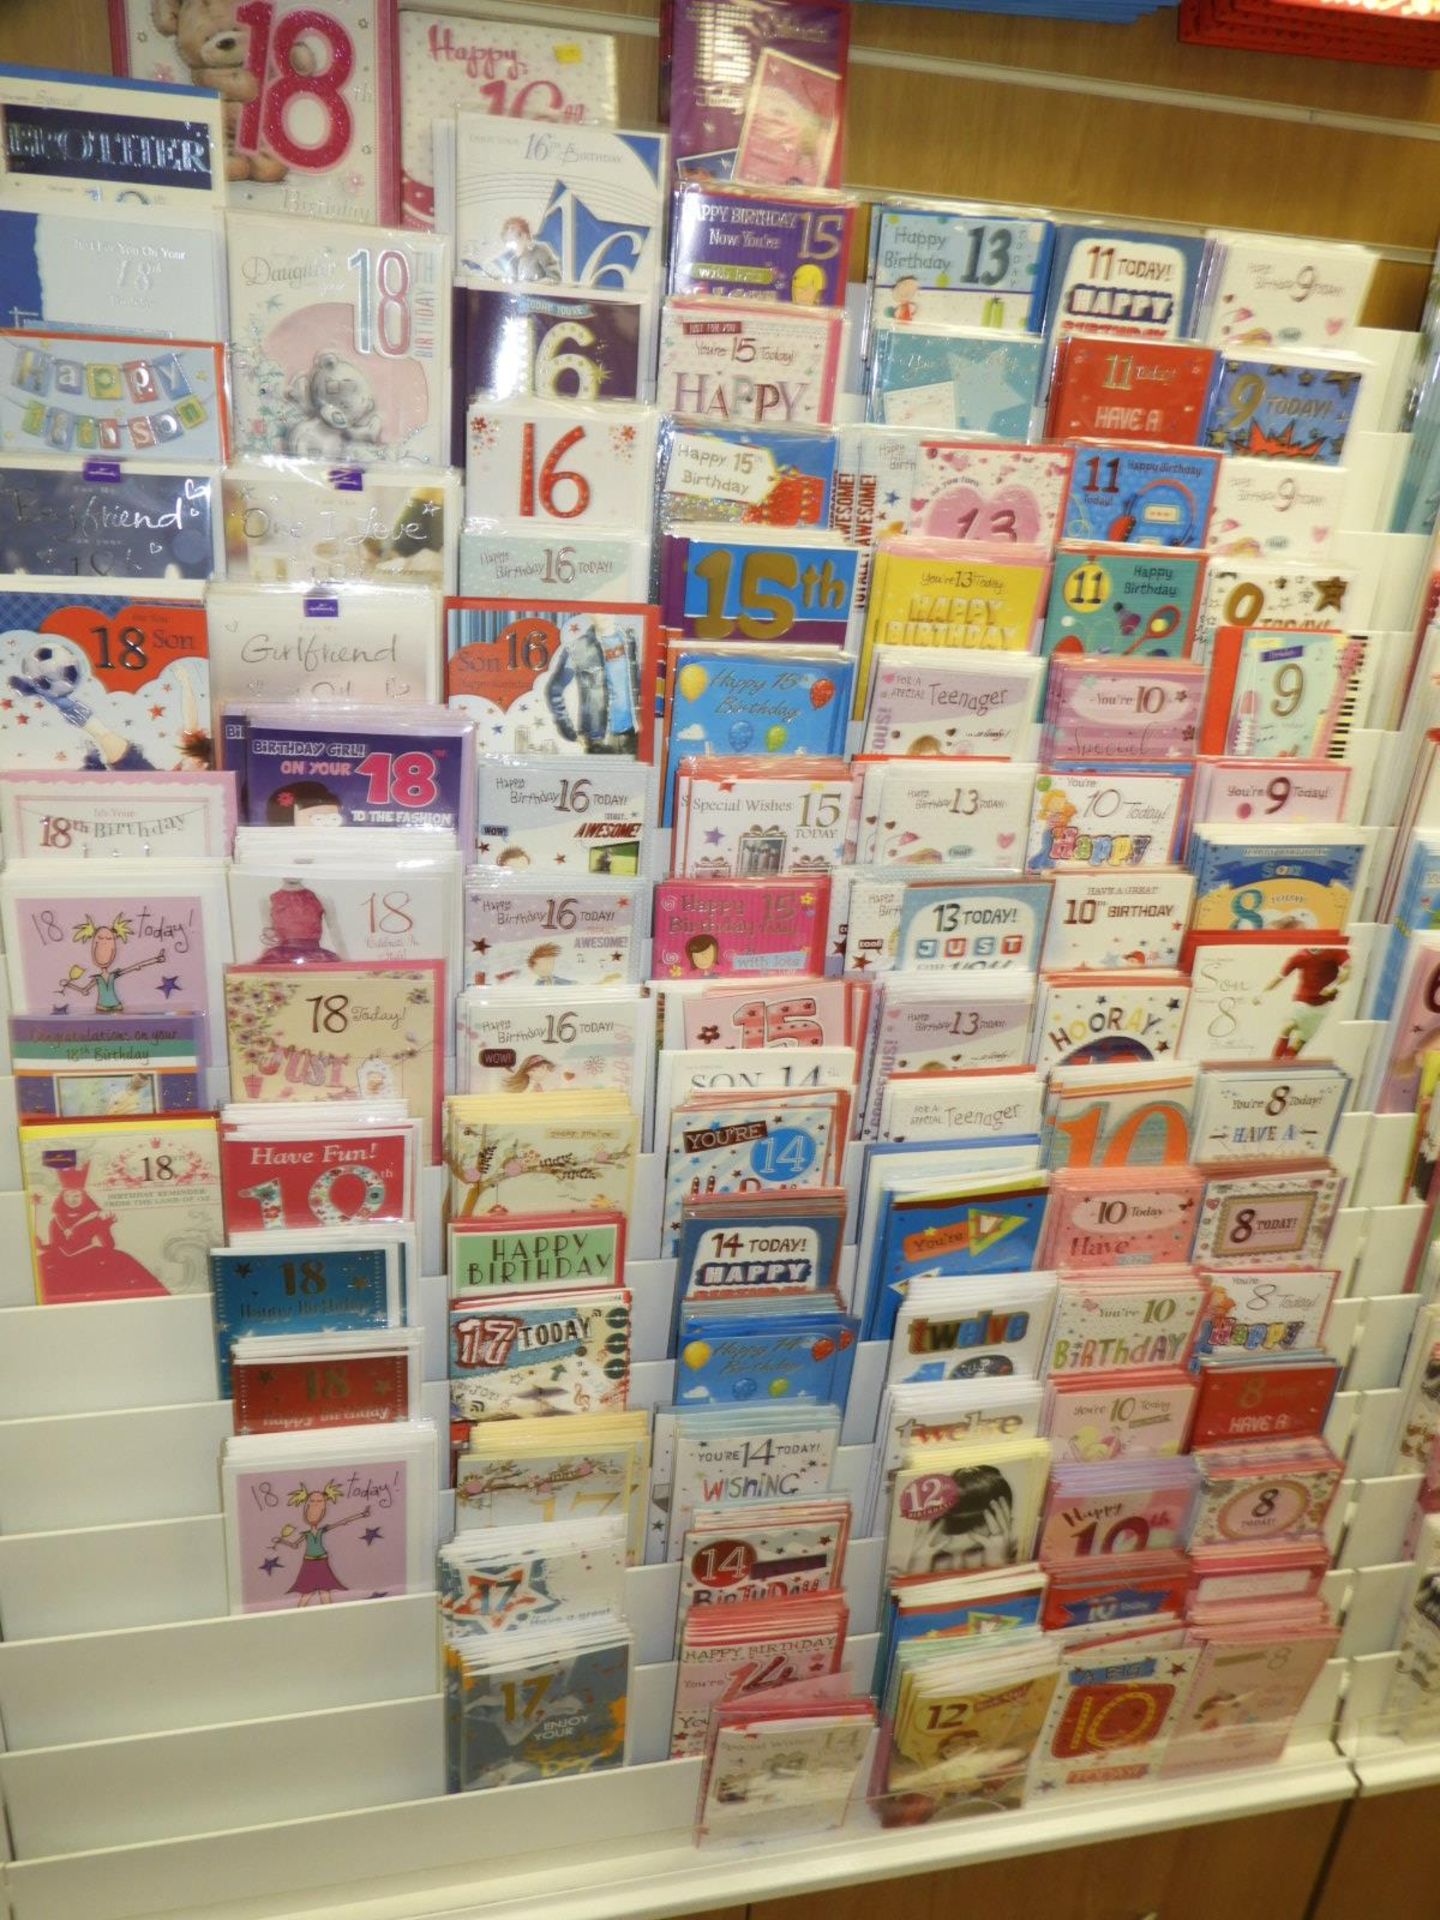 Contents of the Greetings Cards Display Stand to I